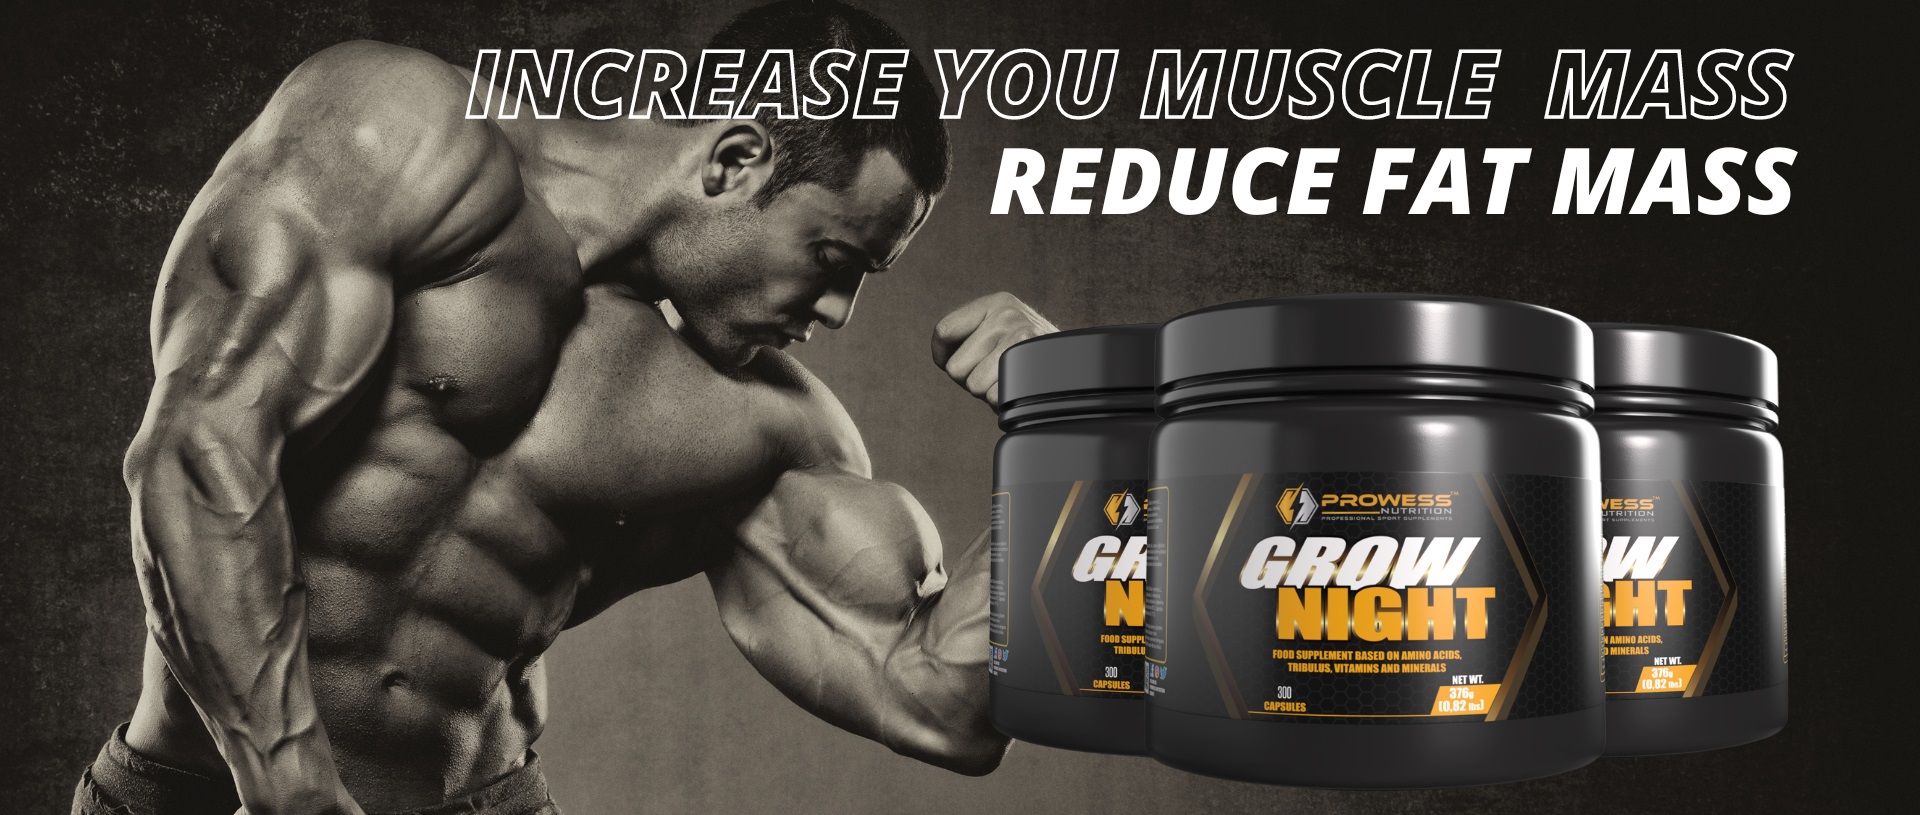 INCREASE YOU MUSCLE MASS (1)